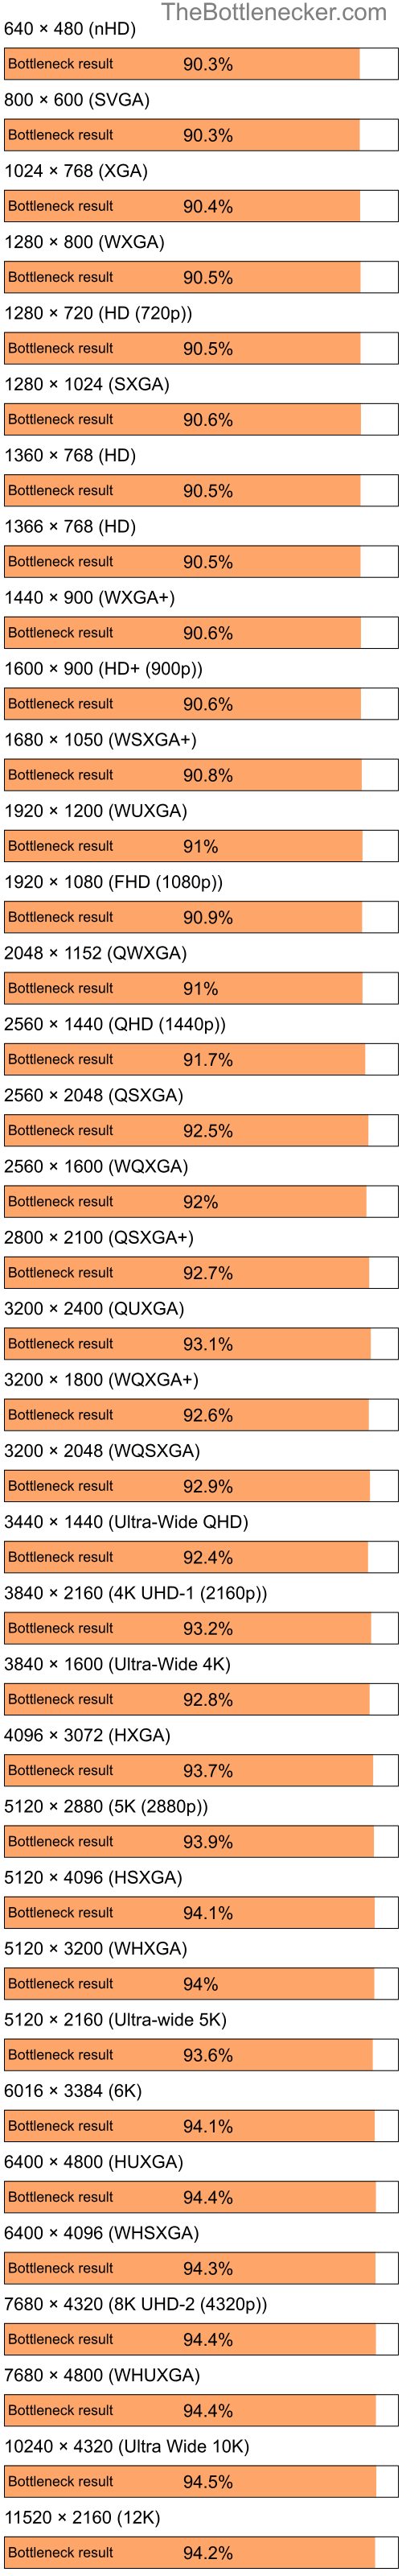 Bottleneck results by resolution for Intel Pentium 4 and NVIDIA GeForce3 Ti 200 in General Tasks